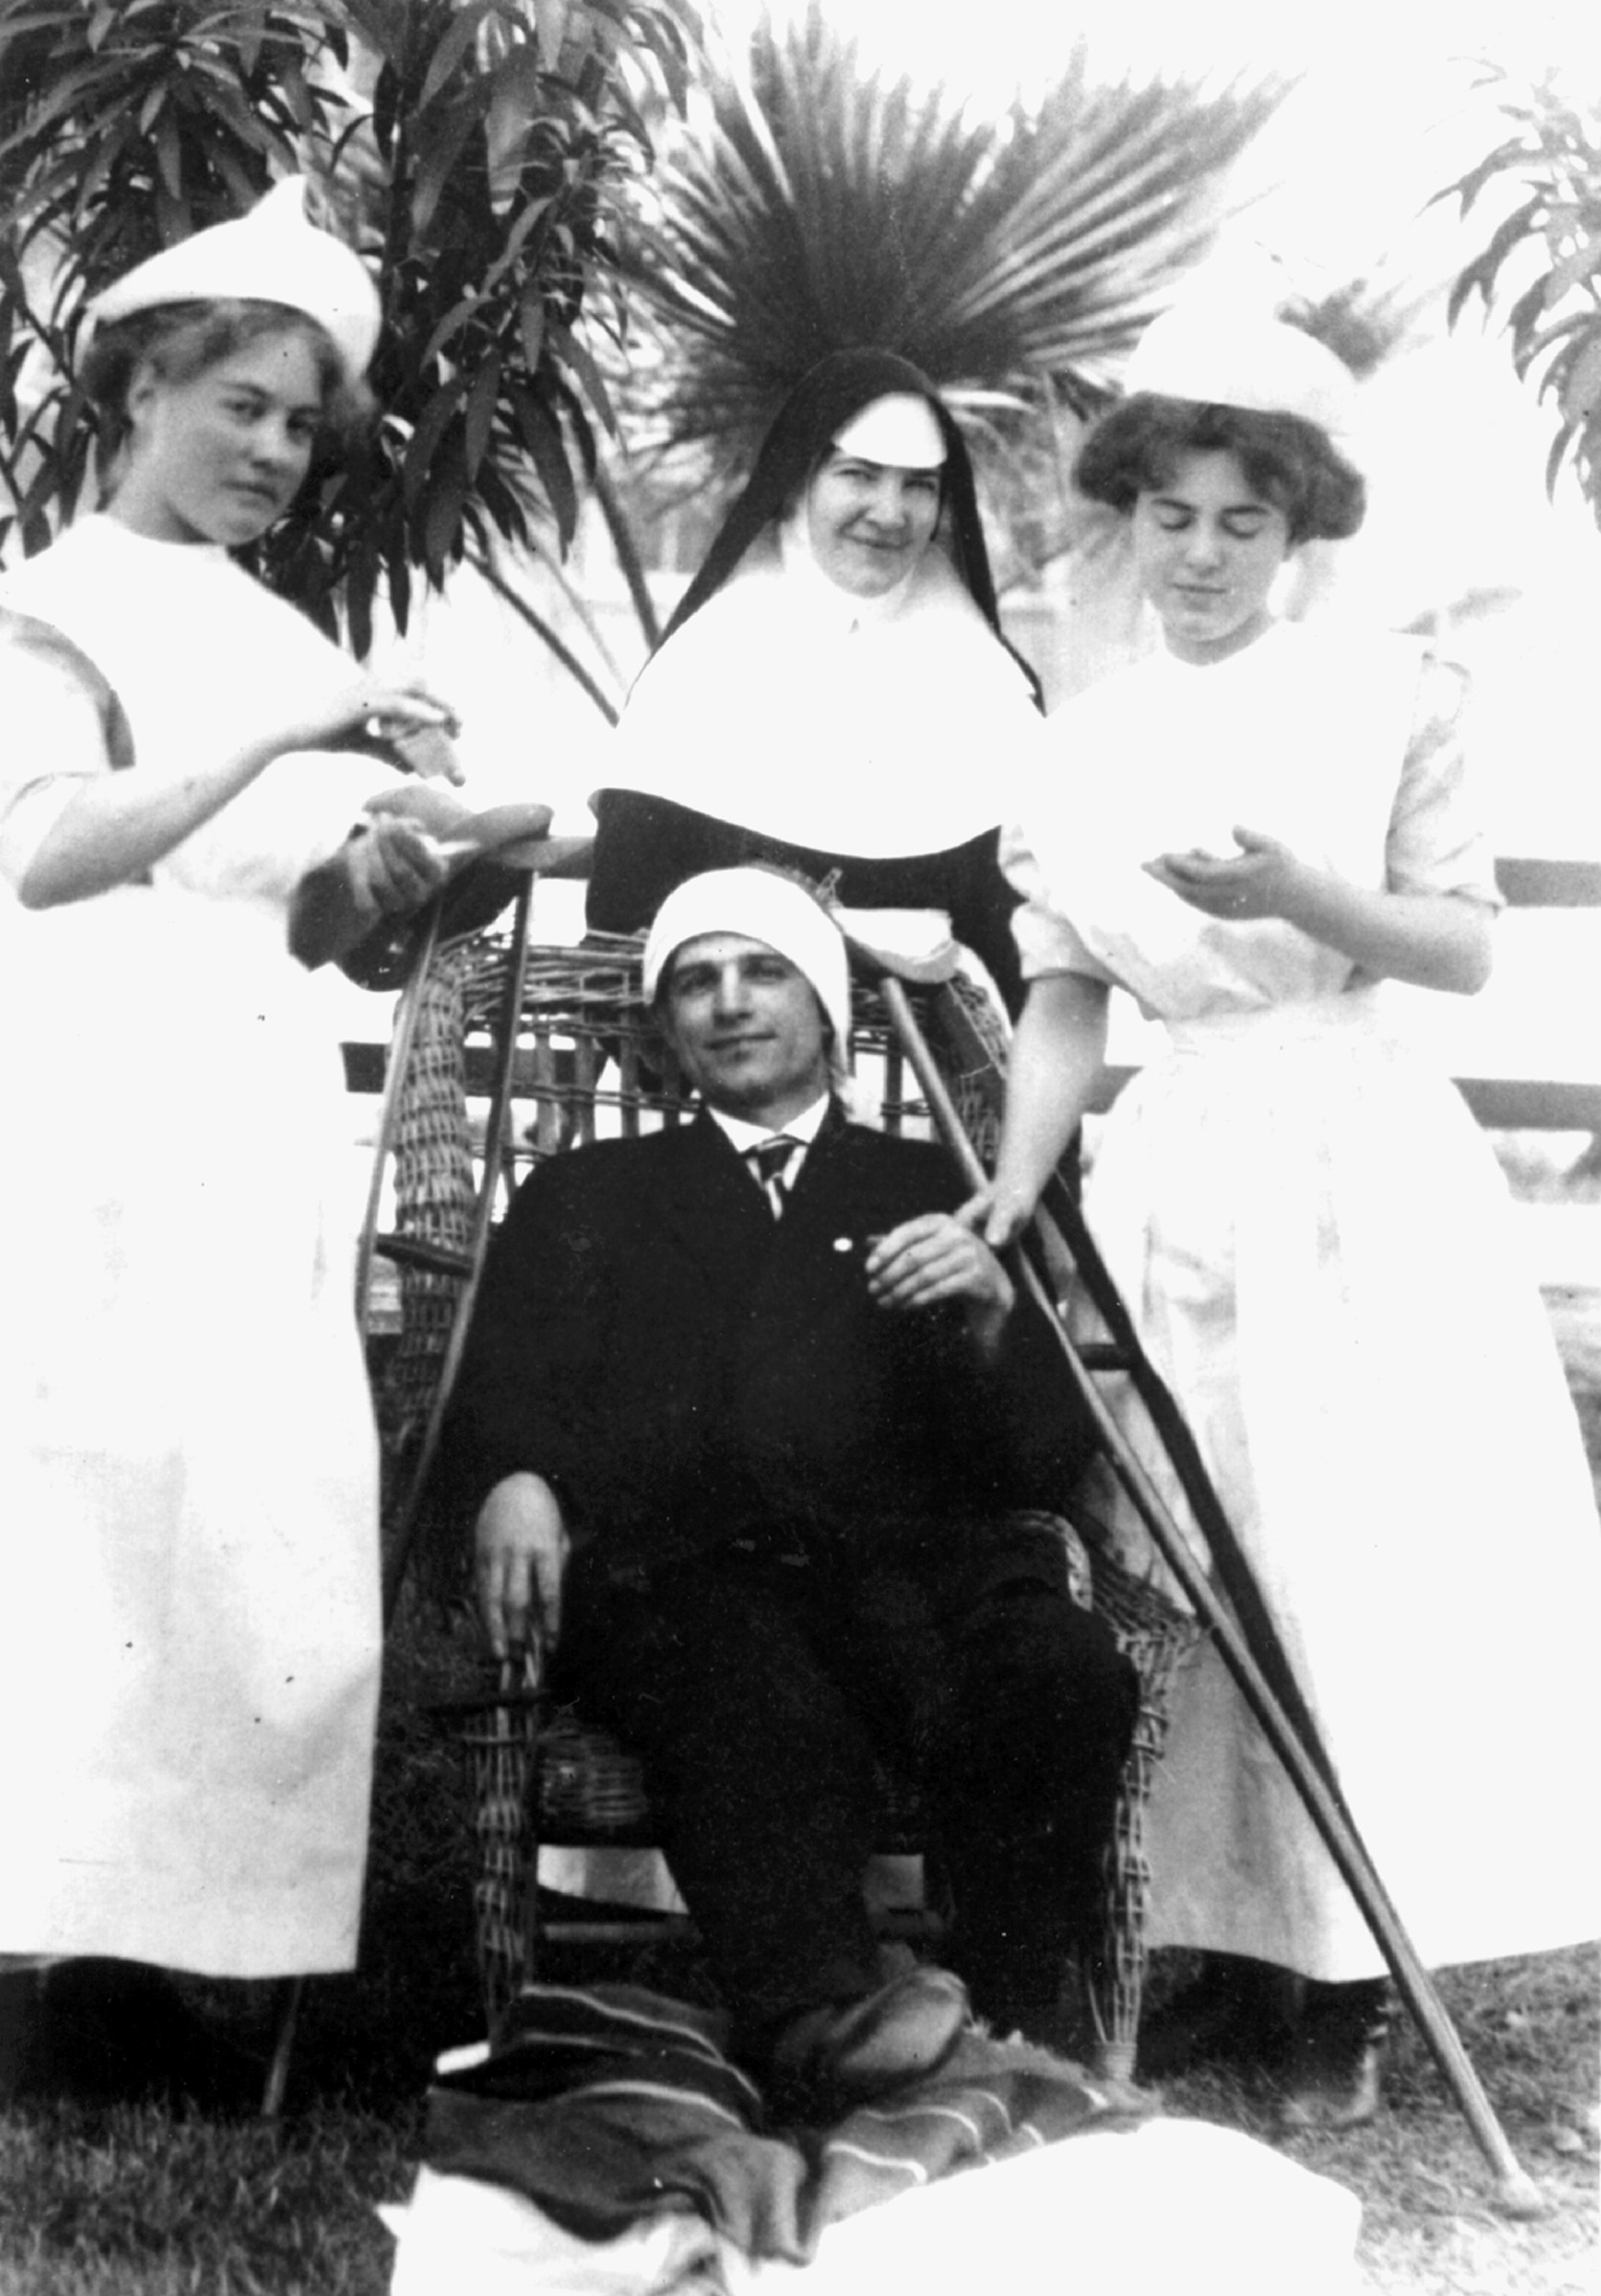 historical photo of Sisters treating a patient